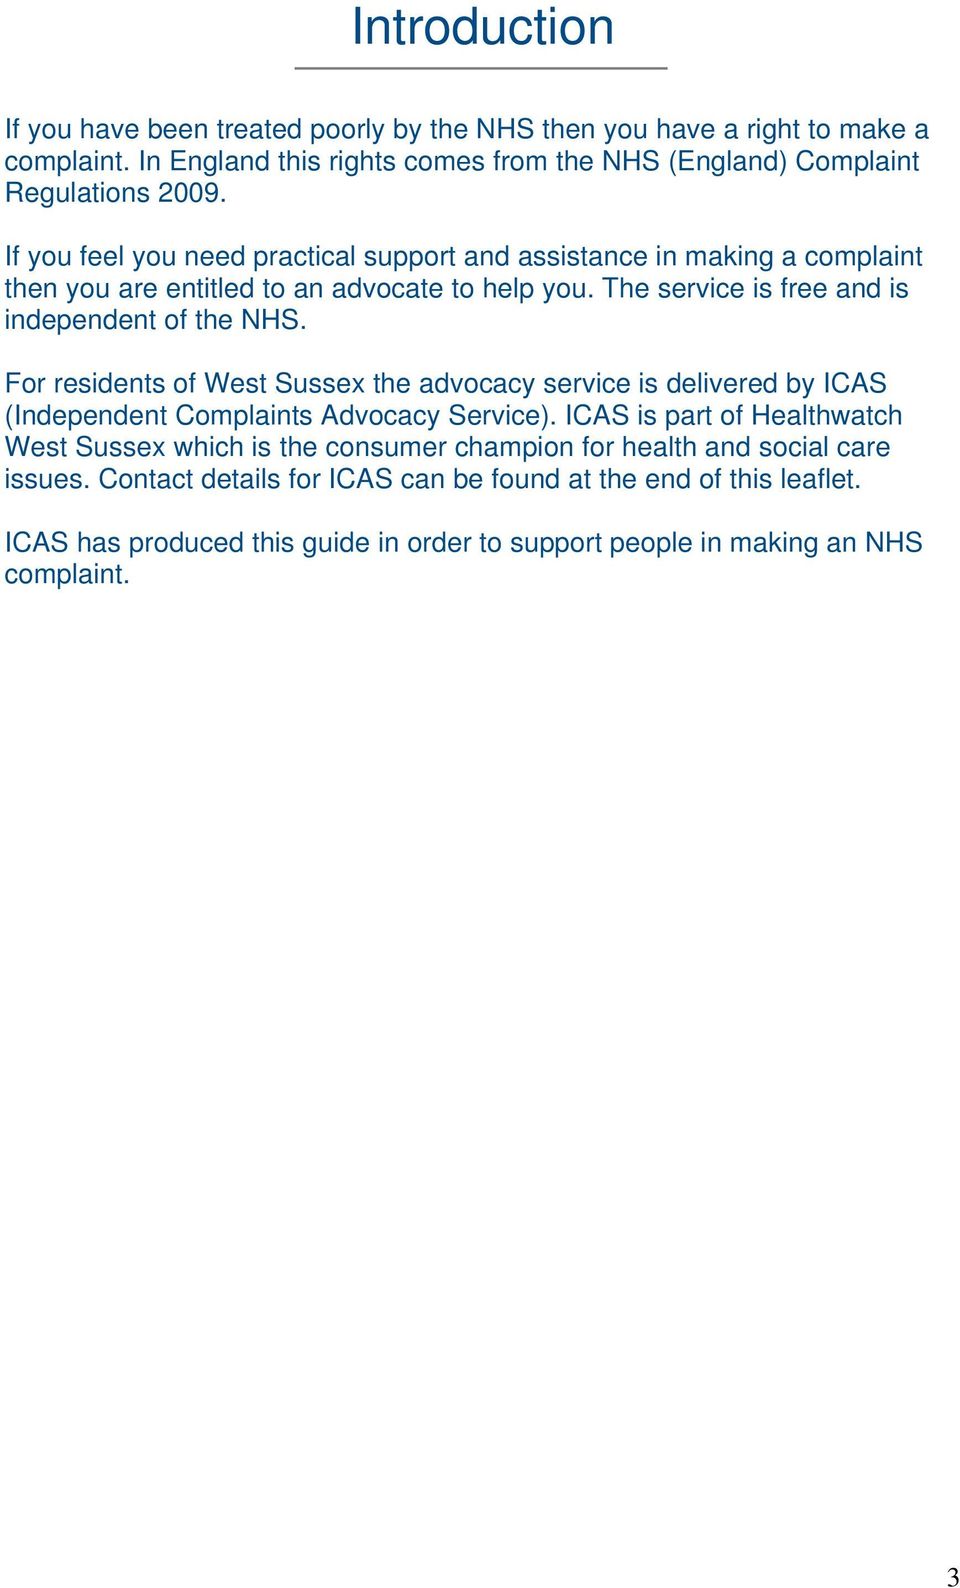 For residents of West Sussex the advocacy service is delivered by ICAS (Independent Complaints Advocacy Service).